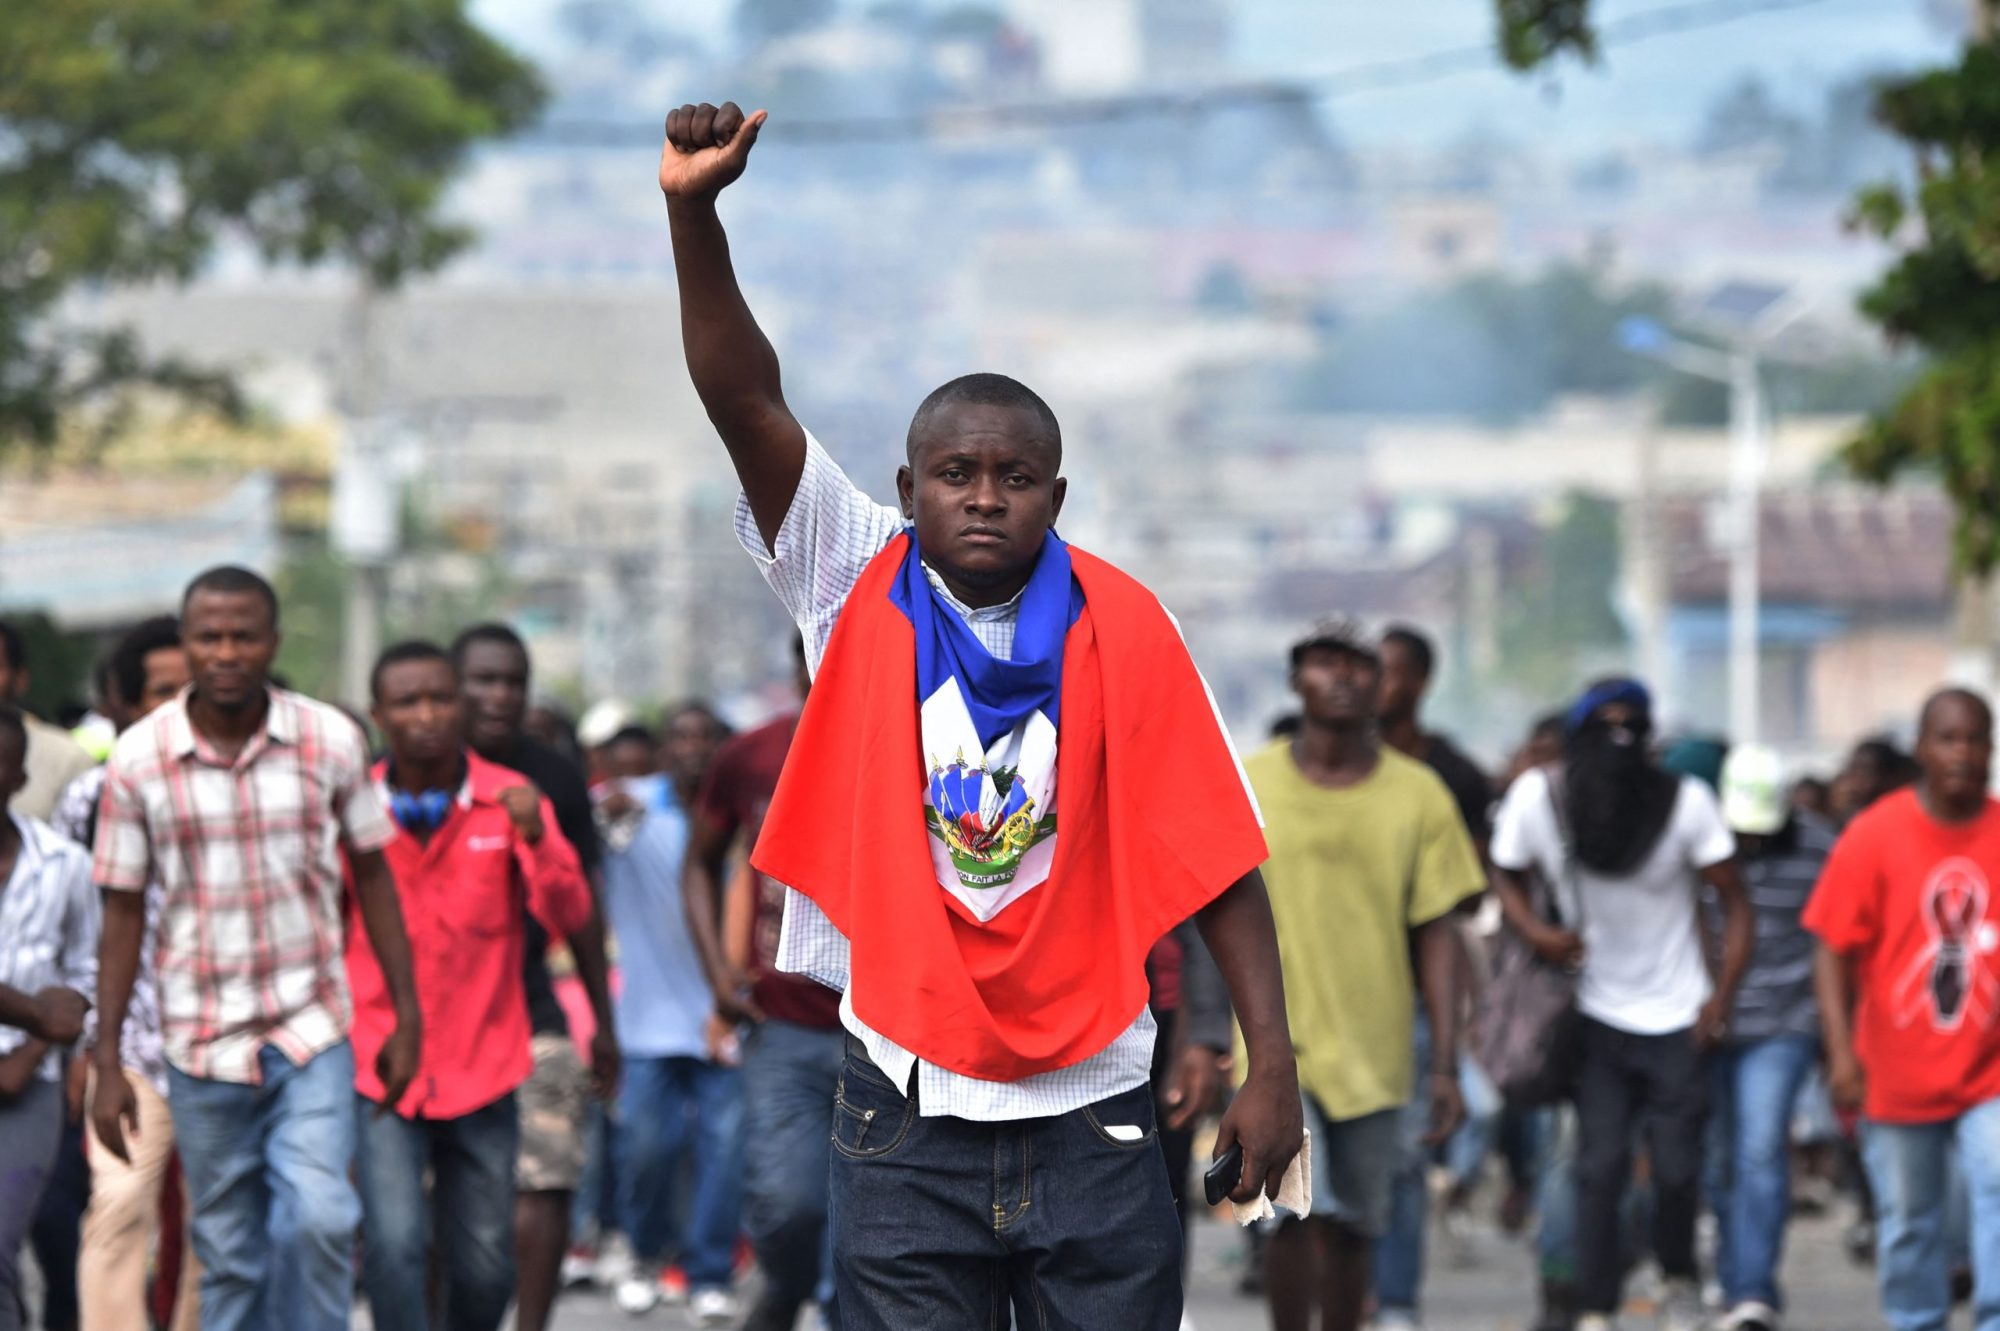 A man holds up his fist as demonstrators march through the streets of Port-au-Prince, on November 23, 2018, demanding the resignation of Haitian President Jovenel Moise. Photo by HECTOR RETAMAL/AFP via Getty Images